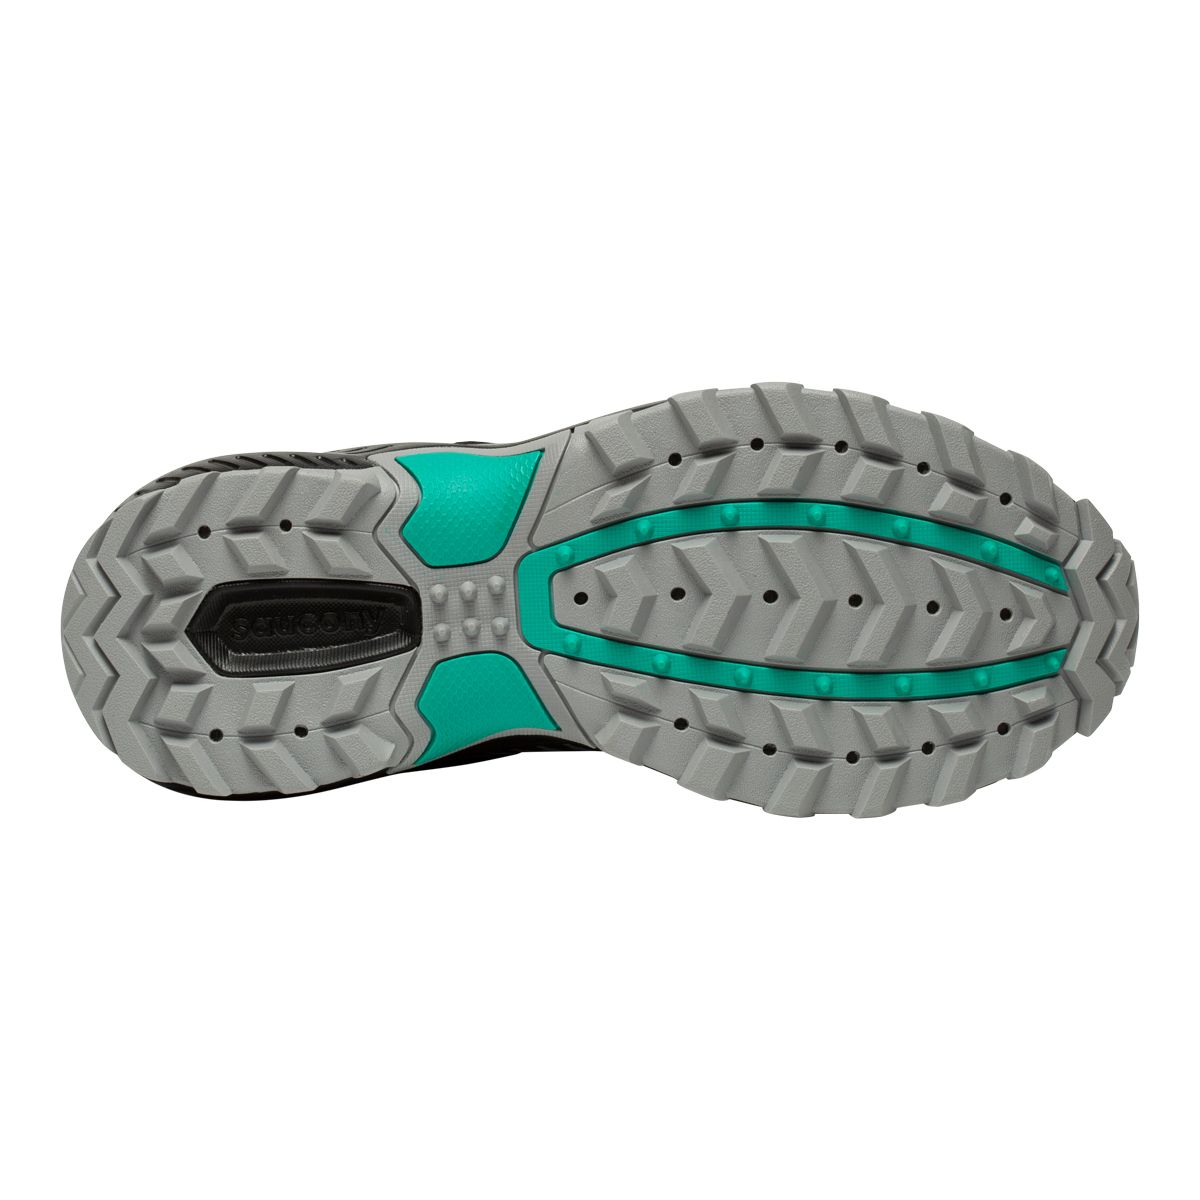 Saucony Women's Excursion TR15 Gore-Tex Trail Cushioned Waterproof